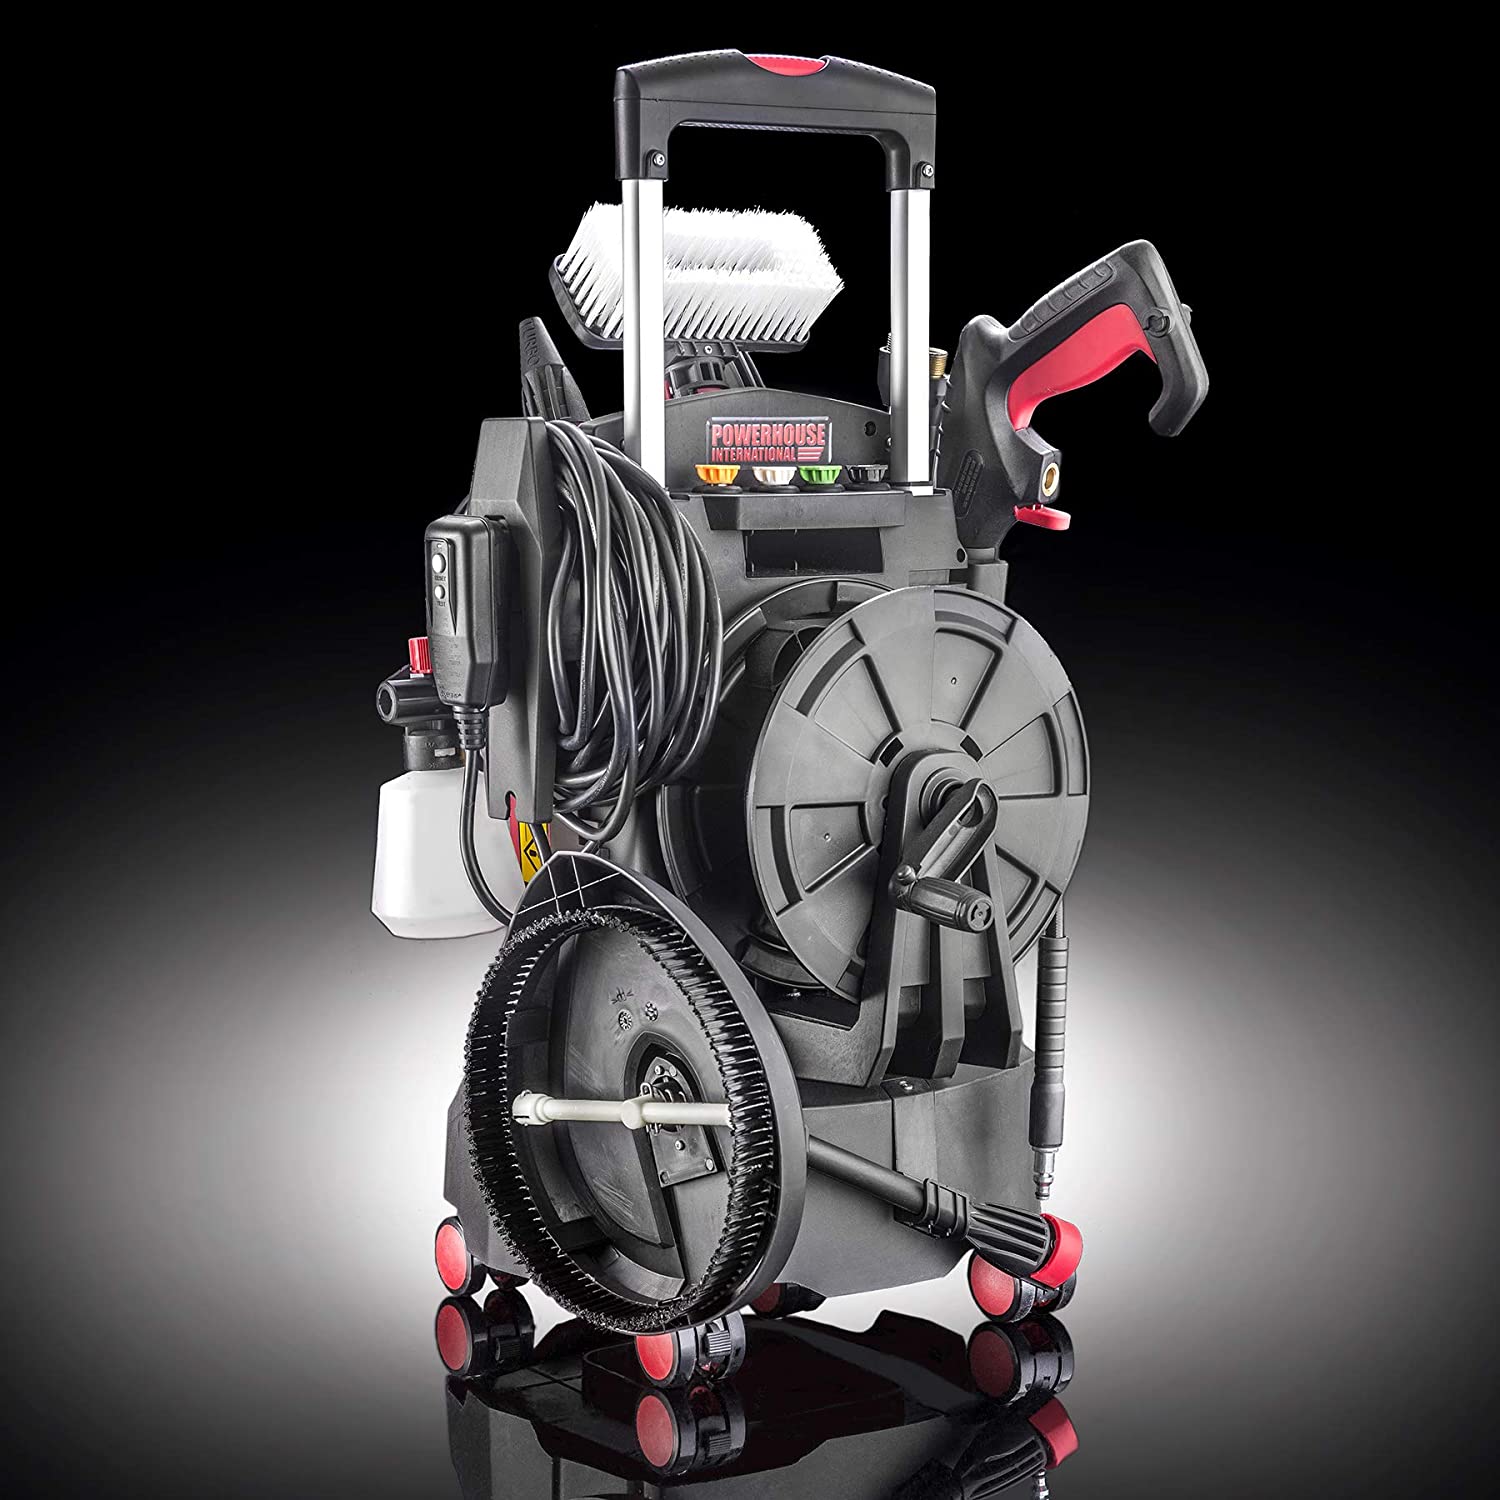 5 Most Powerful Electric Pressure Washer & Buying Guide